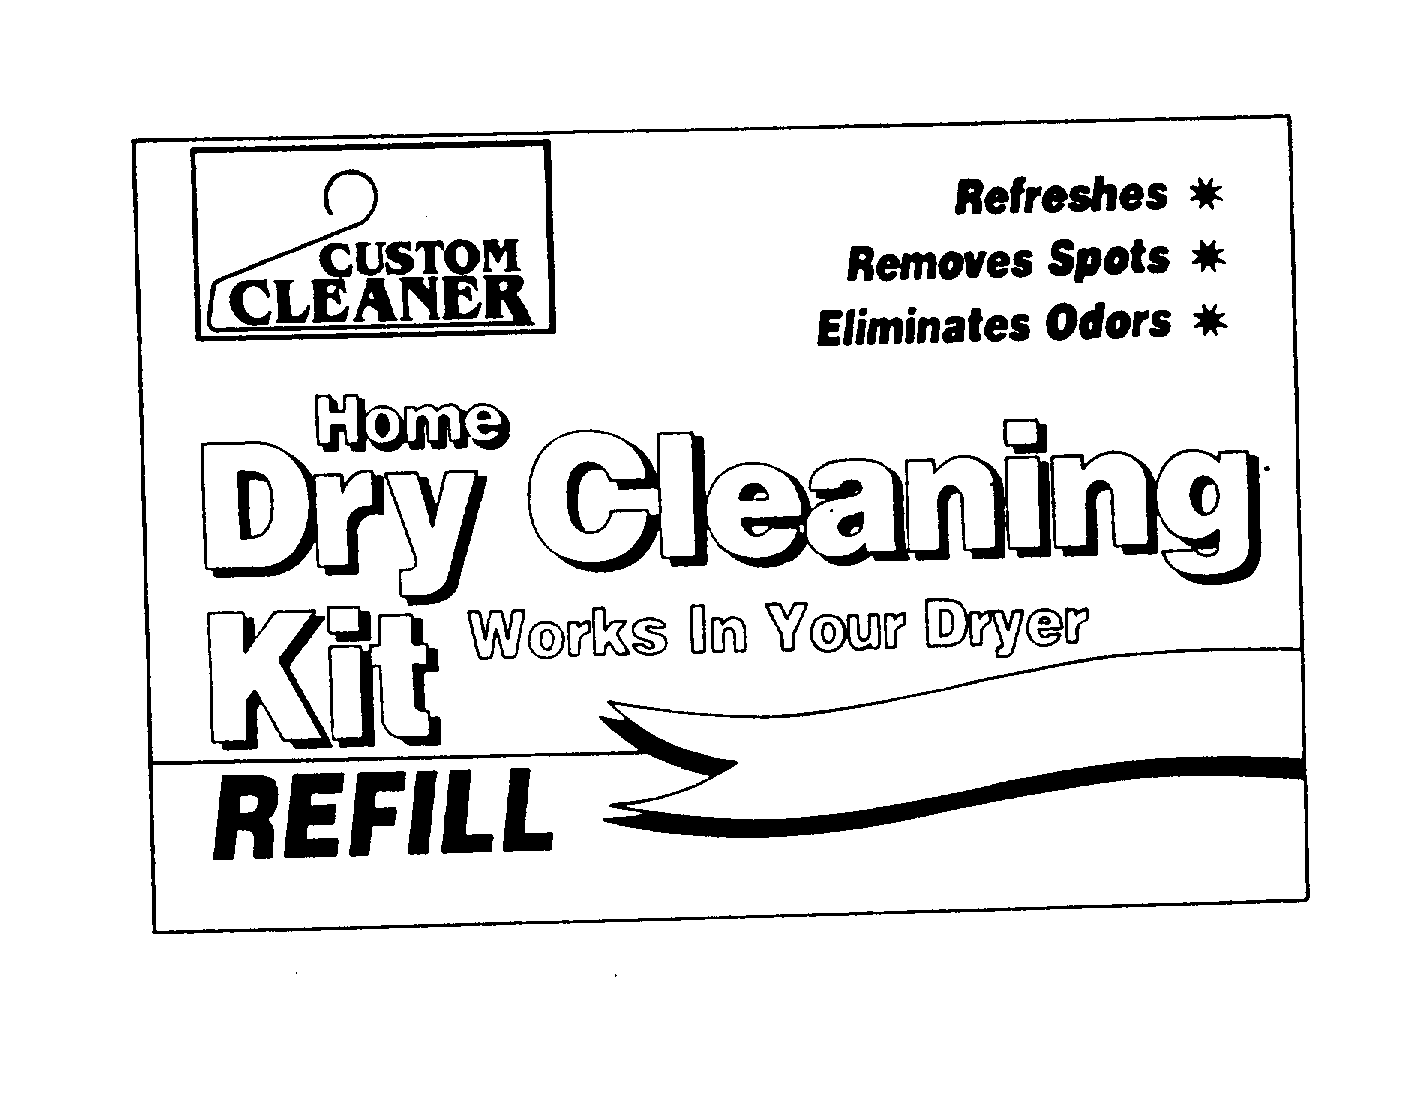  CUSTOM CLEANER HOME DRY CLEANING KIT WORKS IN YOUR DRYER REFILL REFRESHES REMOVES SPOTS ELIMINATES ODORS